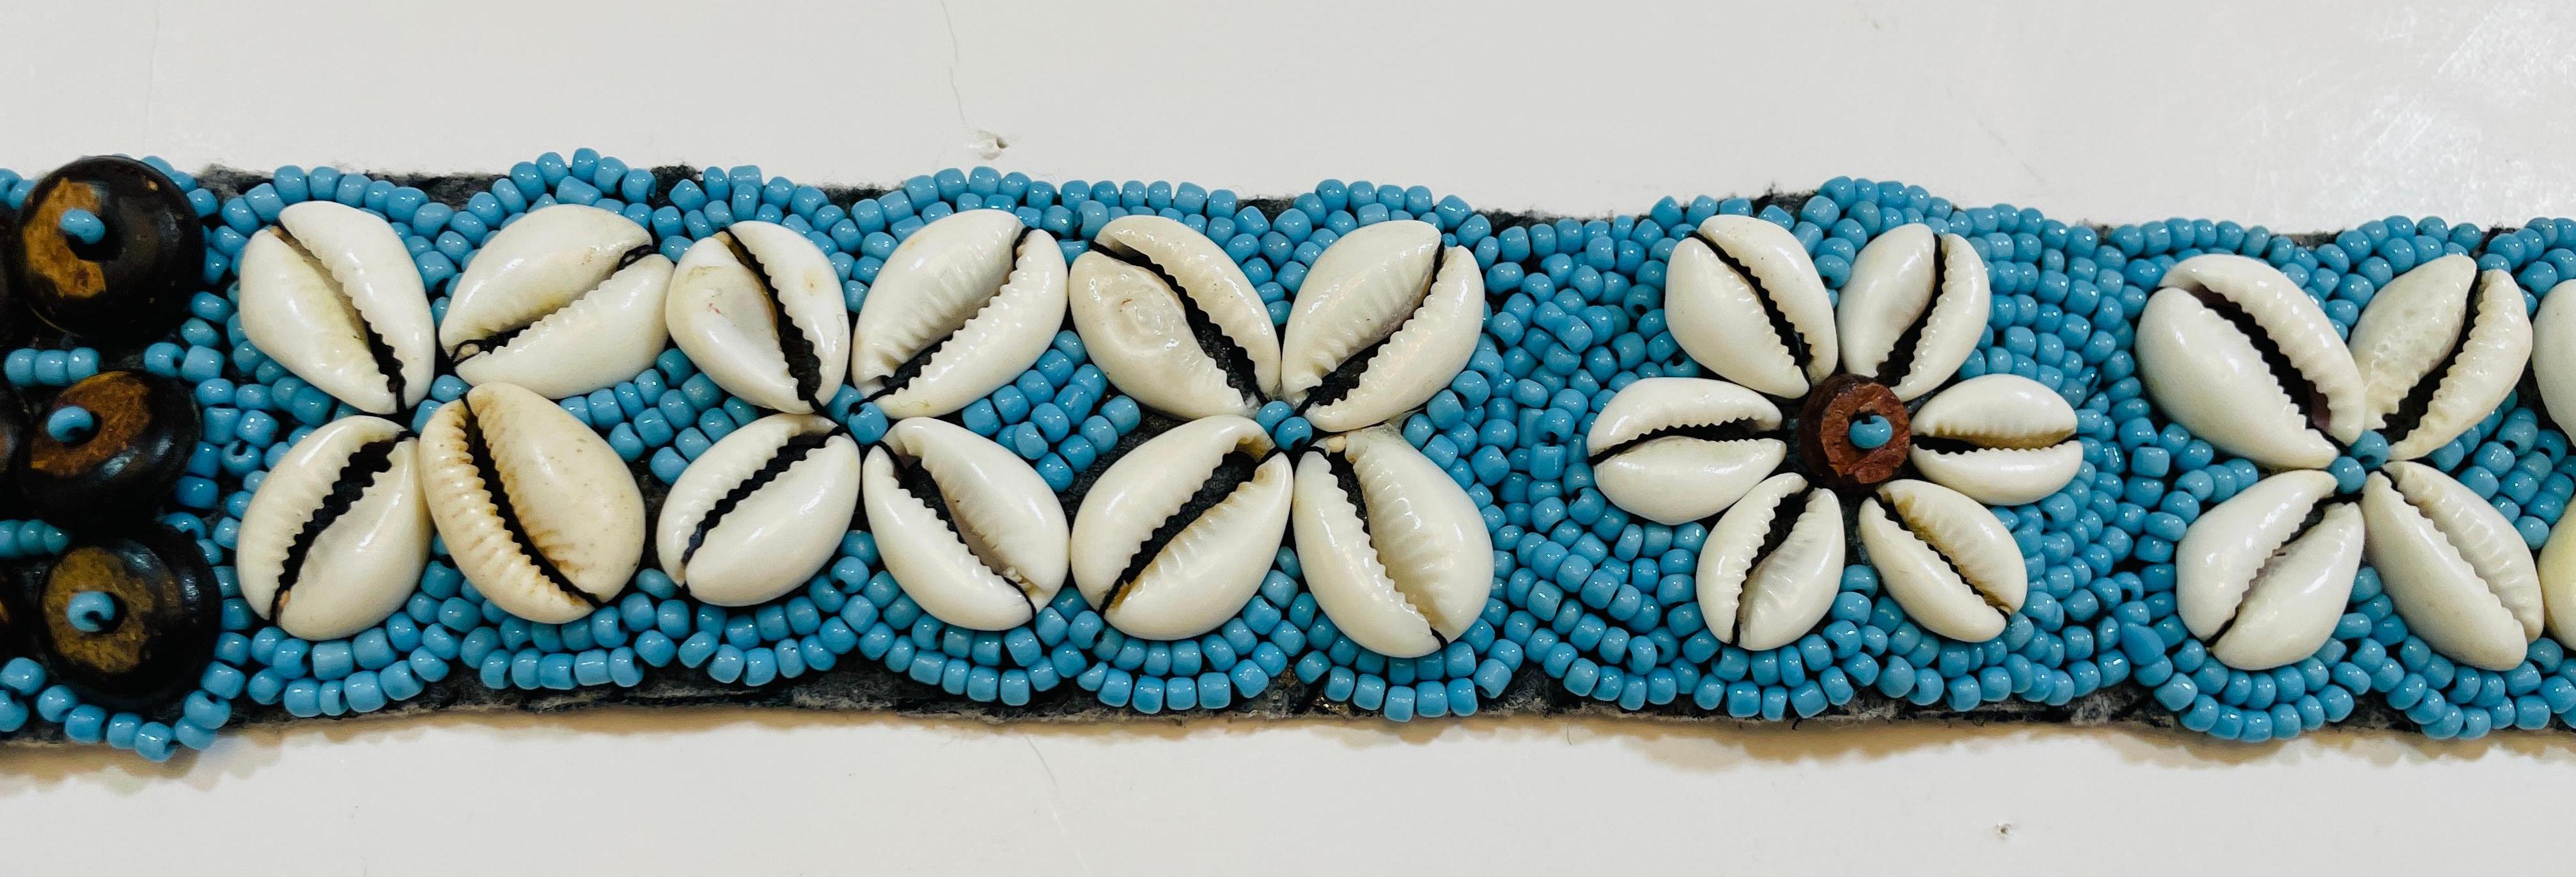 Vintage African Beaded Tie Waist Belt in Turquoise Seed Beads Cowries Sea Shell  For Sale 1